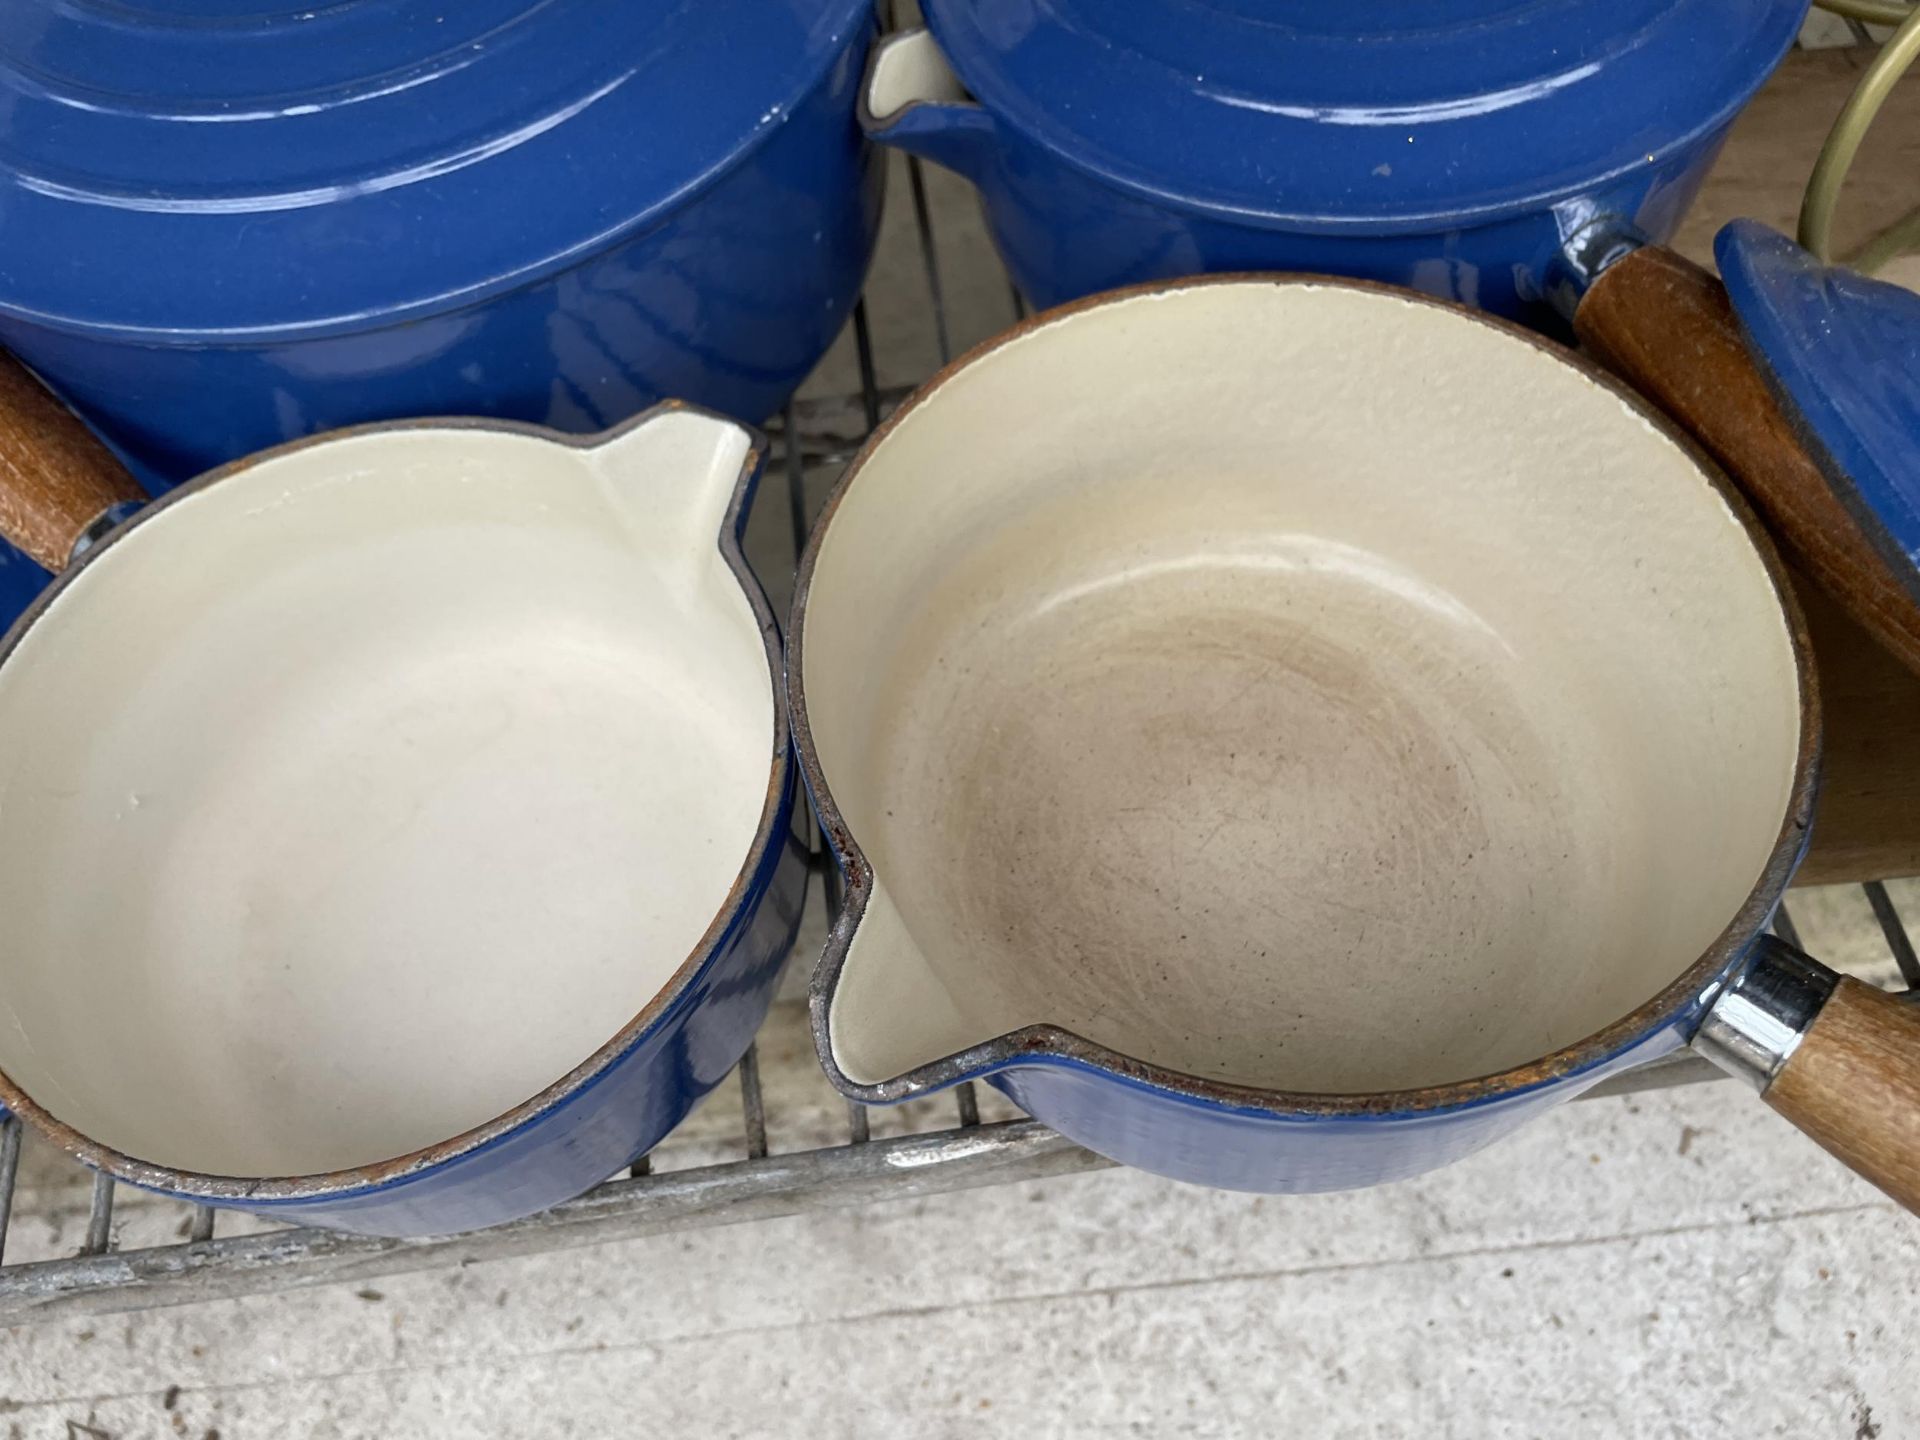 A SET OF FOUR GRADUATED BLUE LE CRUESET PANS WITH LIDS AND A FURTHER SPARE LID - Image 2 of 3